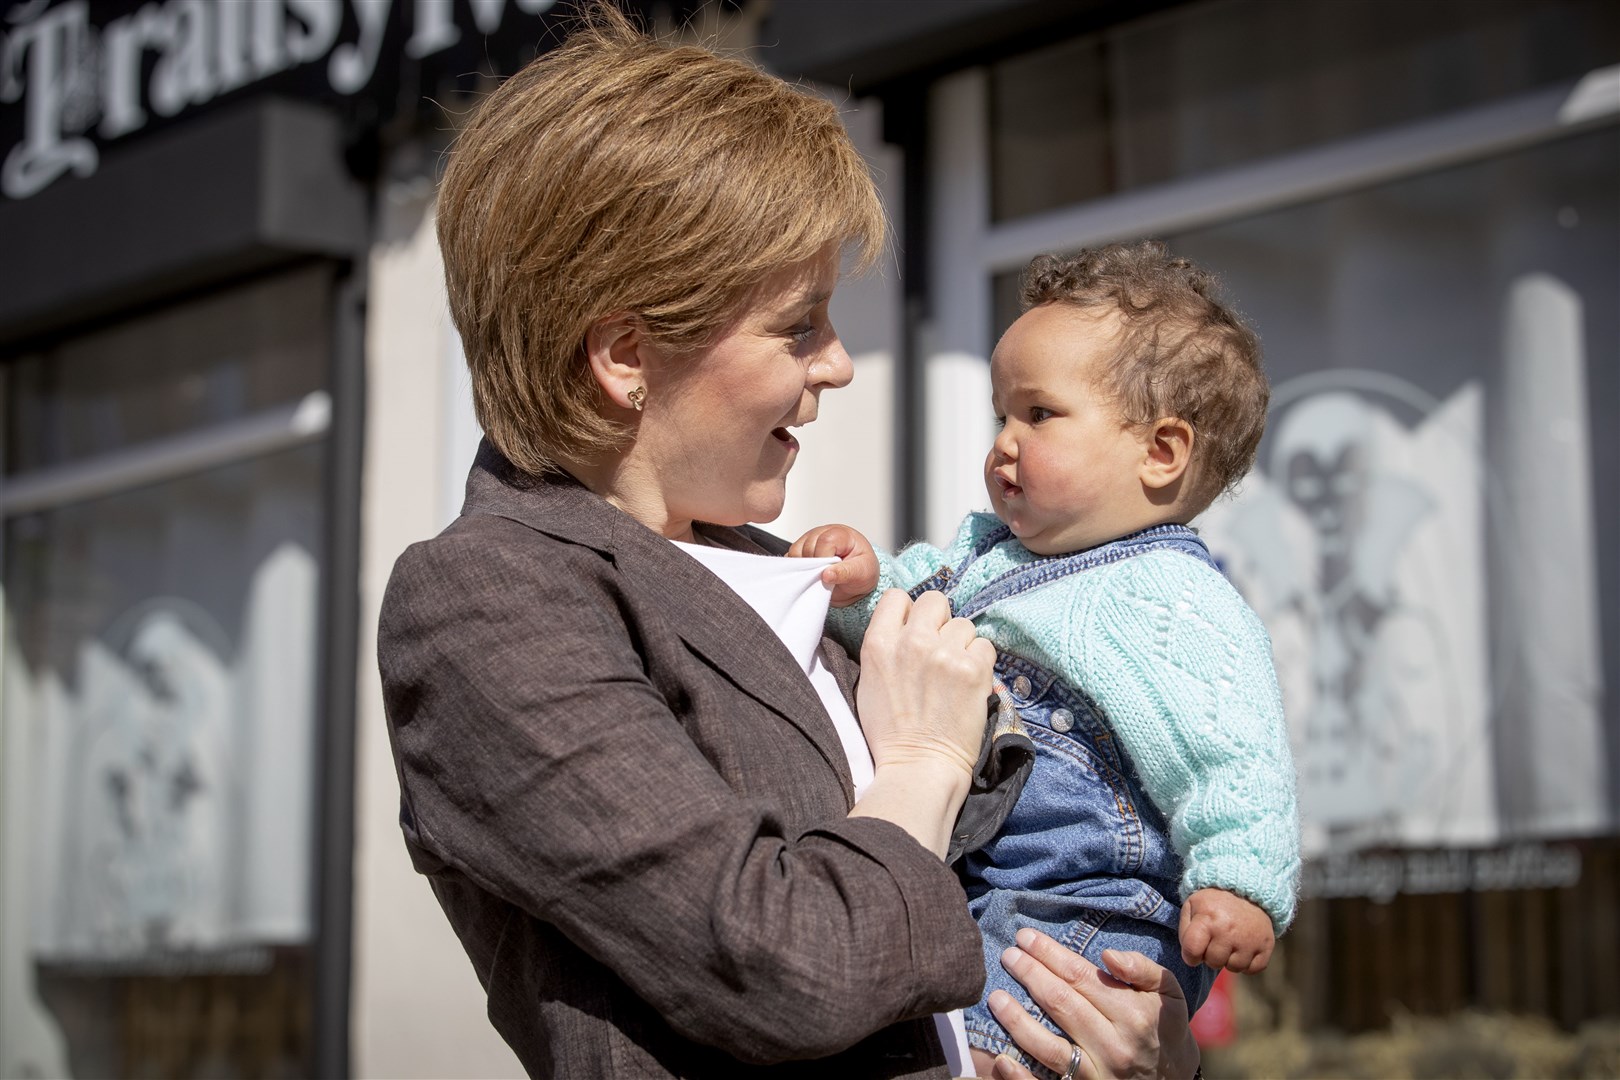 Ms Sturgeon met eight-month-old Habibba Hassan while campaigning in her Glasgow Southside constituency last month (Jane Barlow/PA)